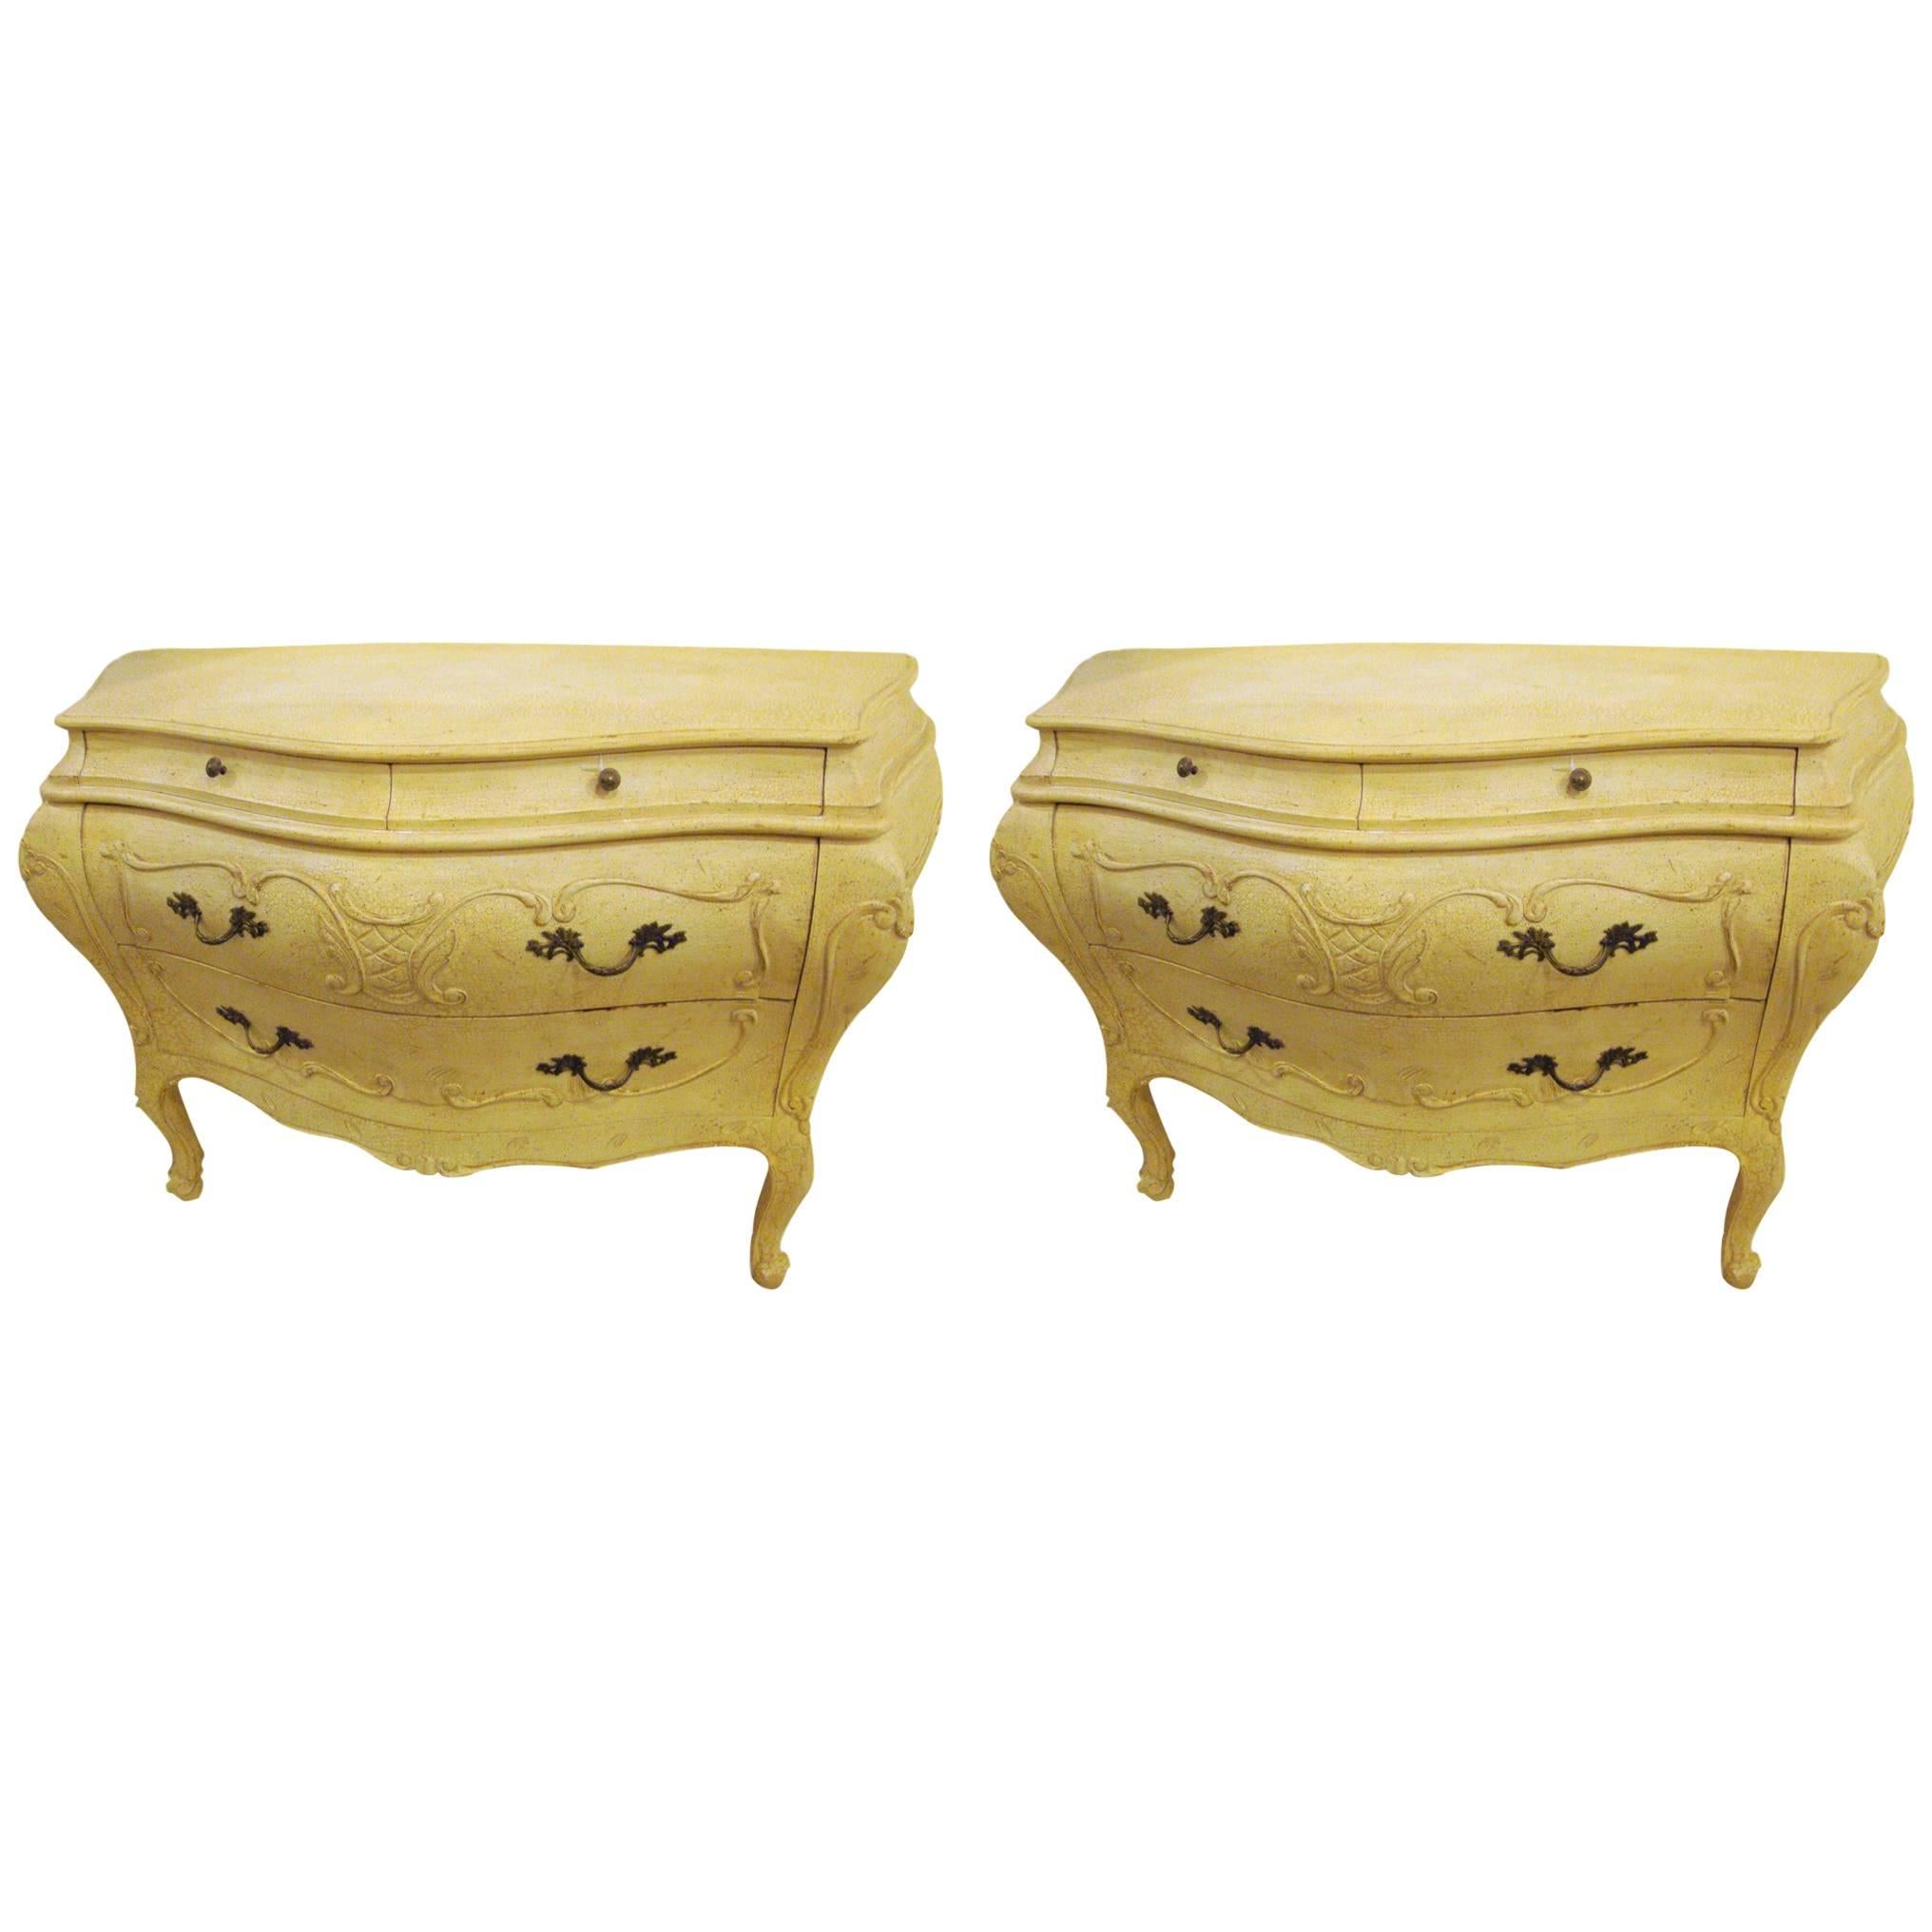 Pair of Louis XV Style Bombe Crackle Finish Commodes or Nightstands